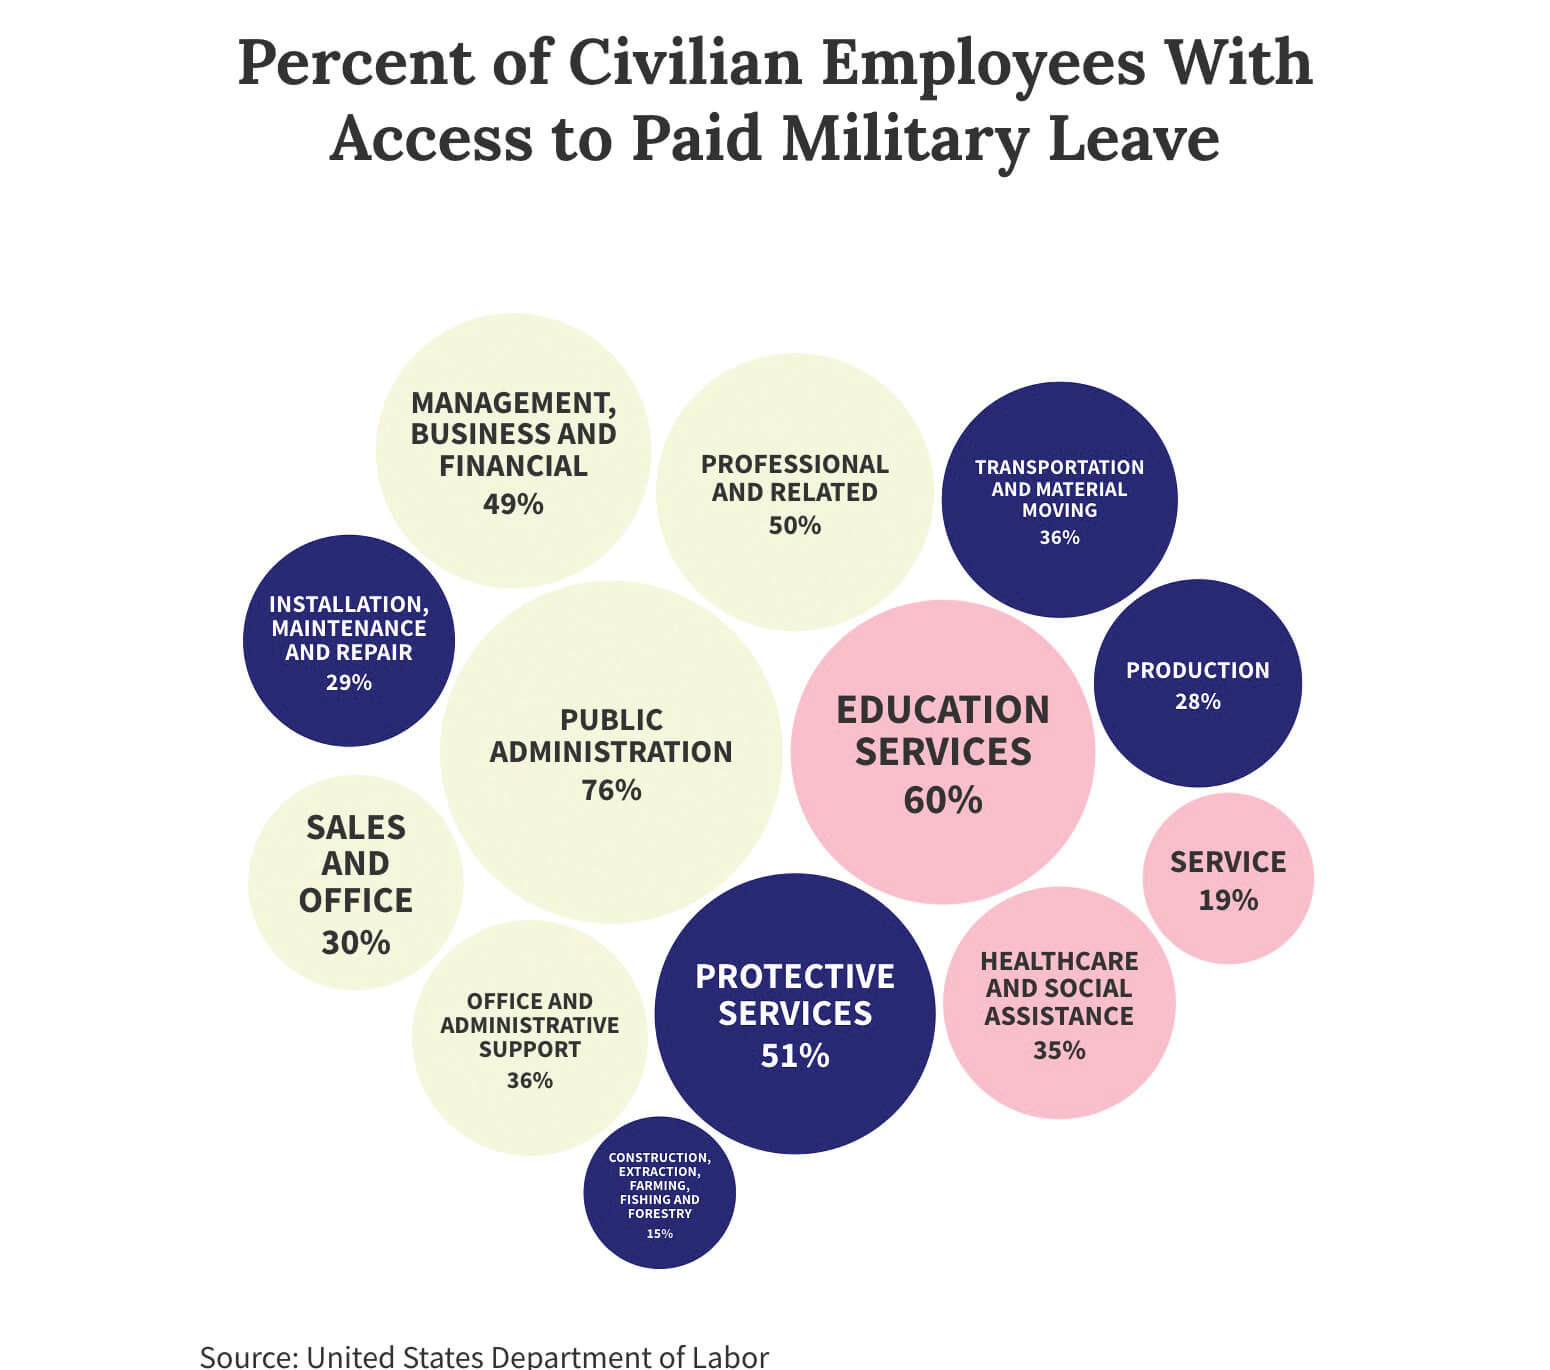 Should civilian and private employers provide paid military leave?